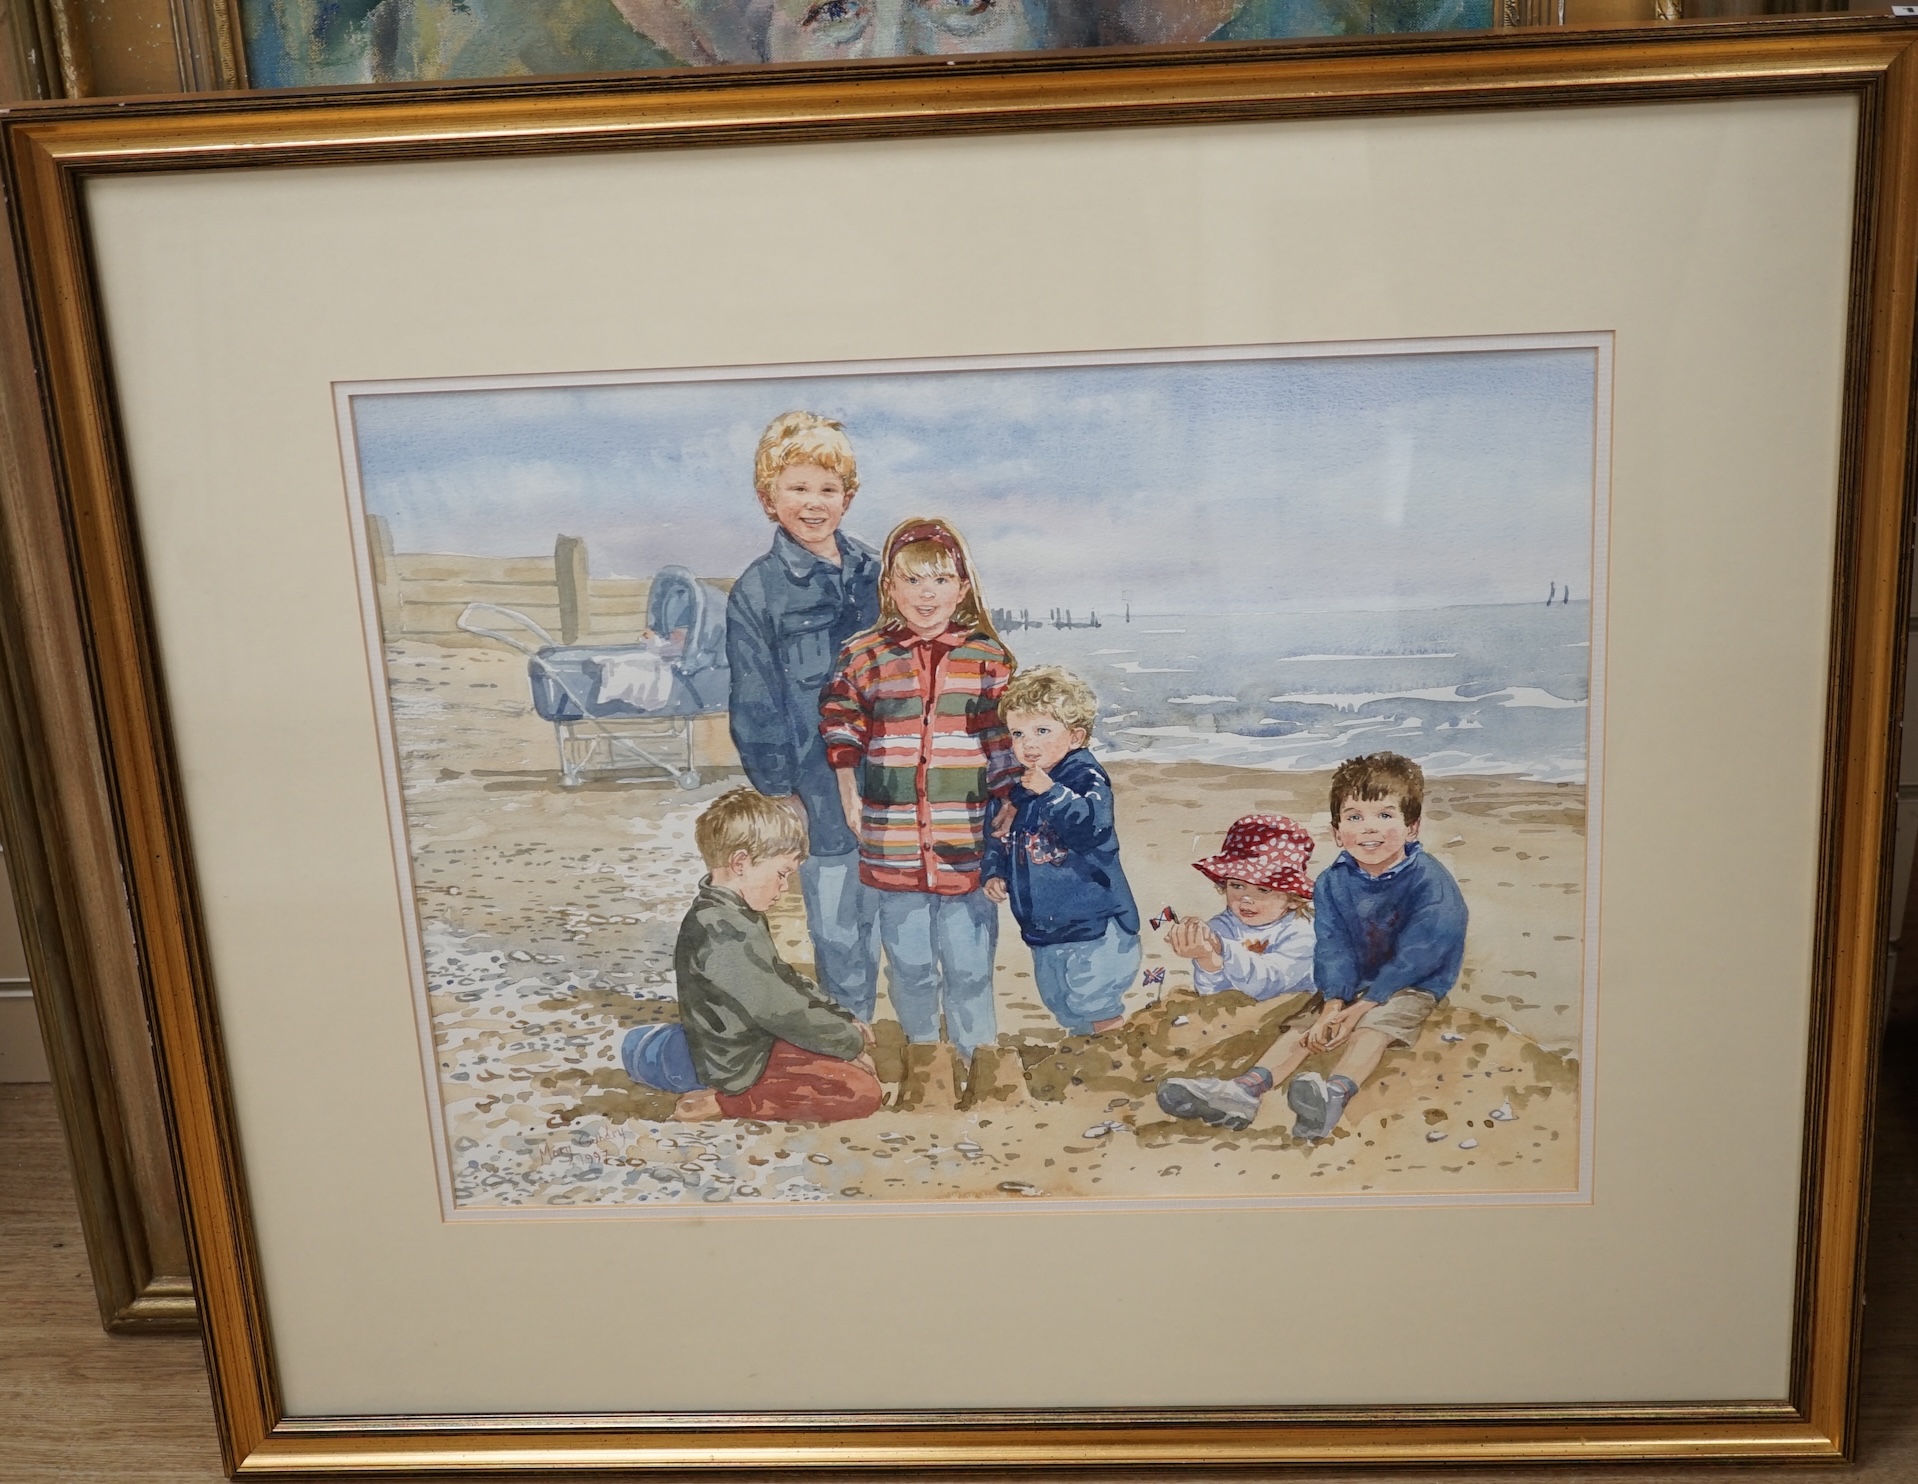 Mary Gundry (20th. C), watercolour, Beach scene with children, signed and dated 1997, 38 x 49cm. Condition - fair